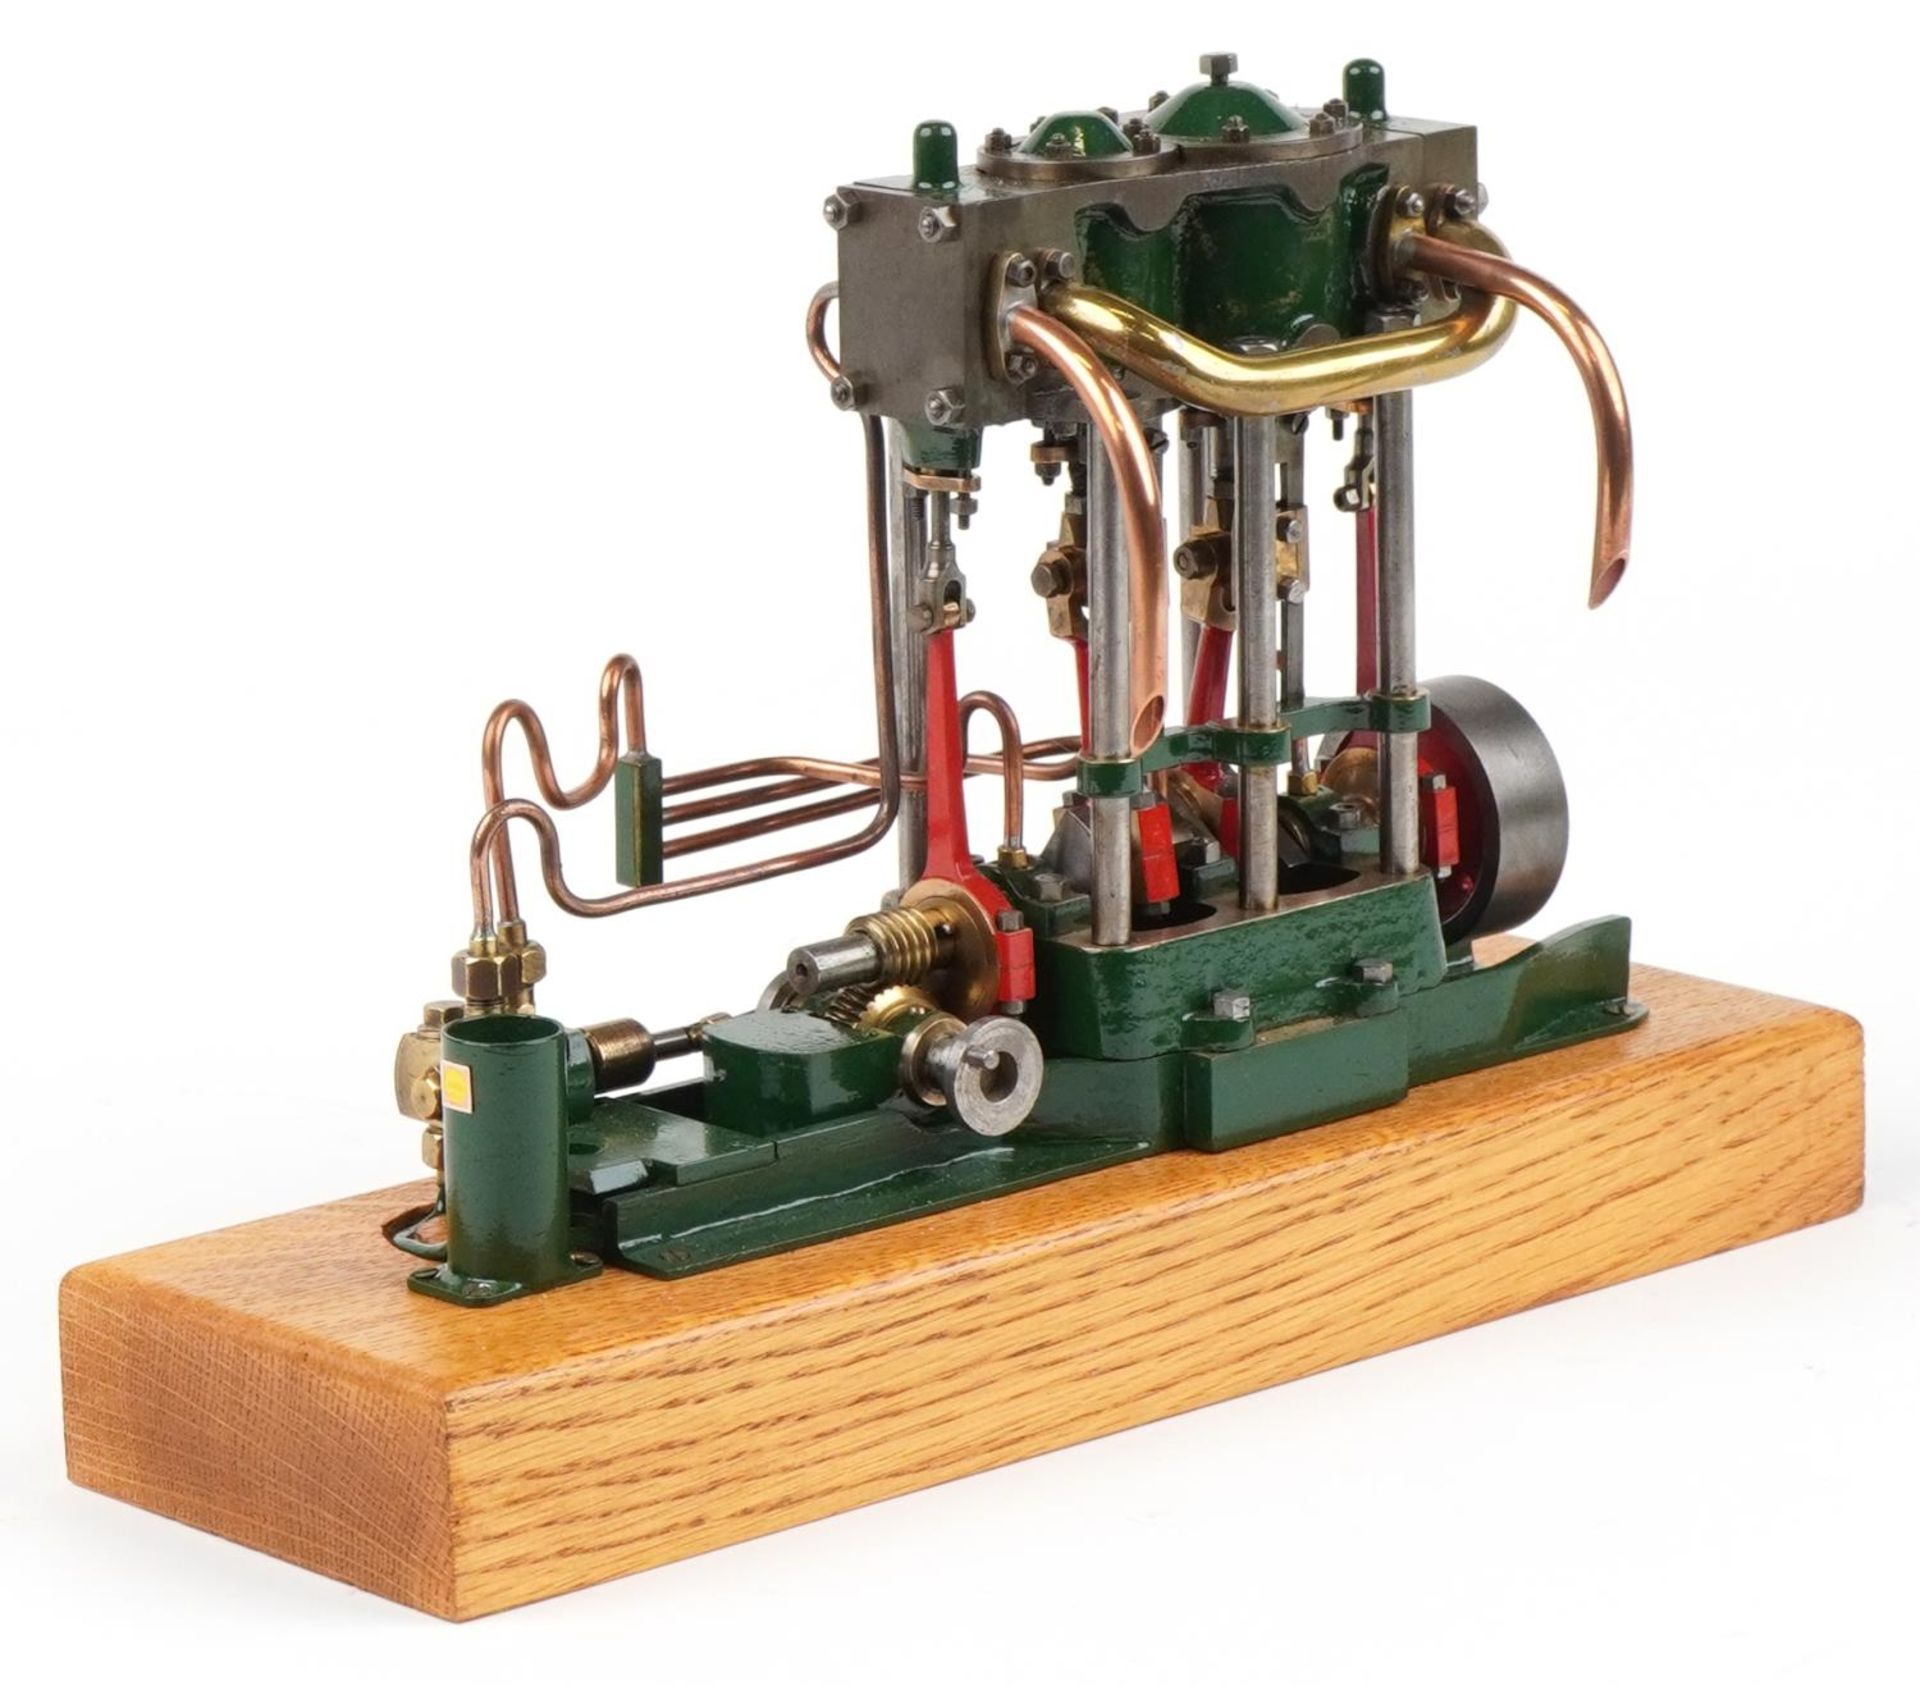 Scratch built steam beam engine on wooden block base, 30.5cm in length : For further information